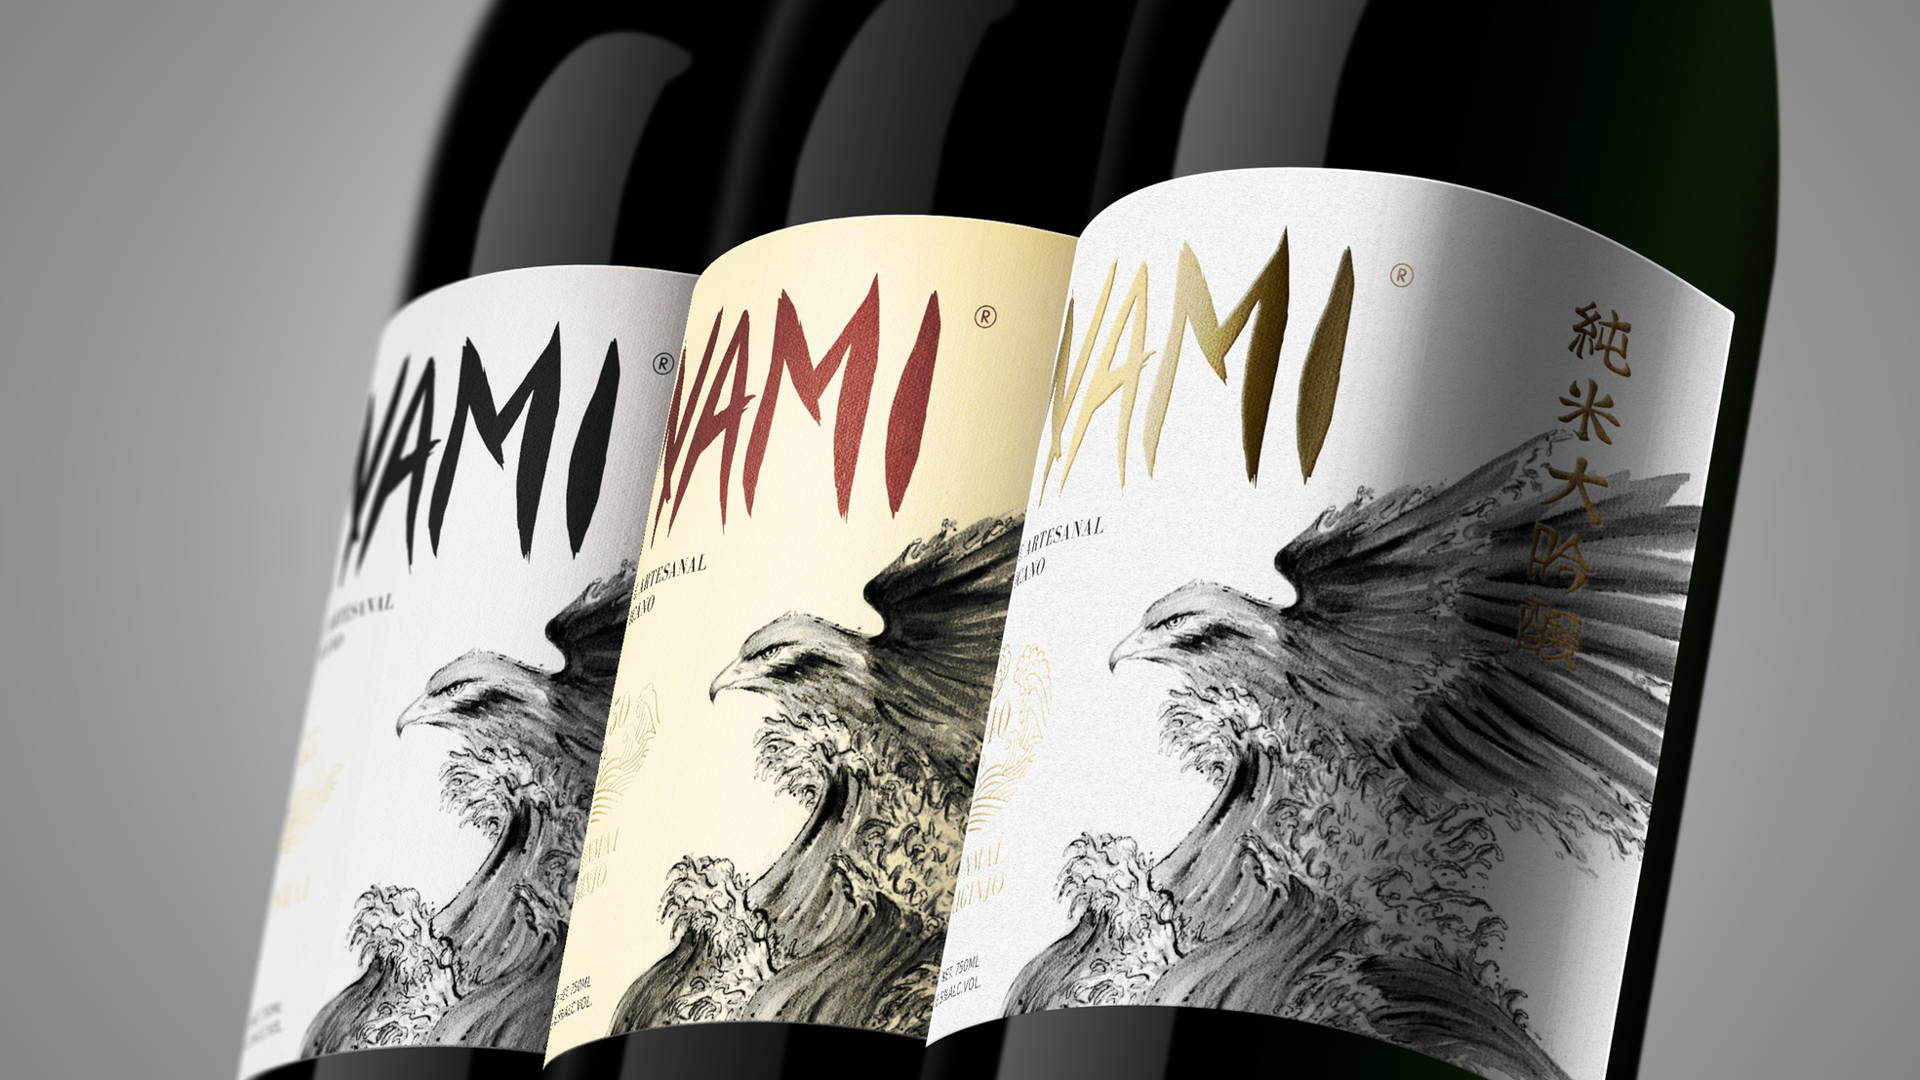 Featured image for Nami is the First Mexican Produced Sake